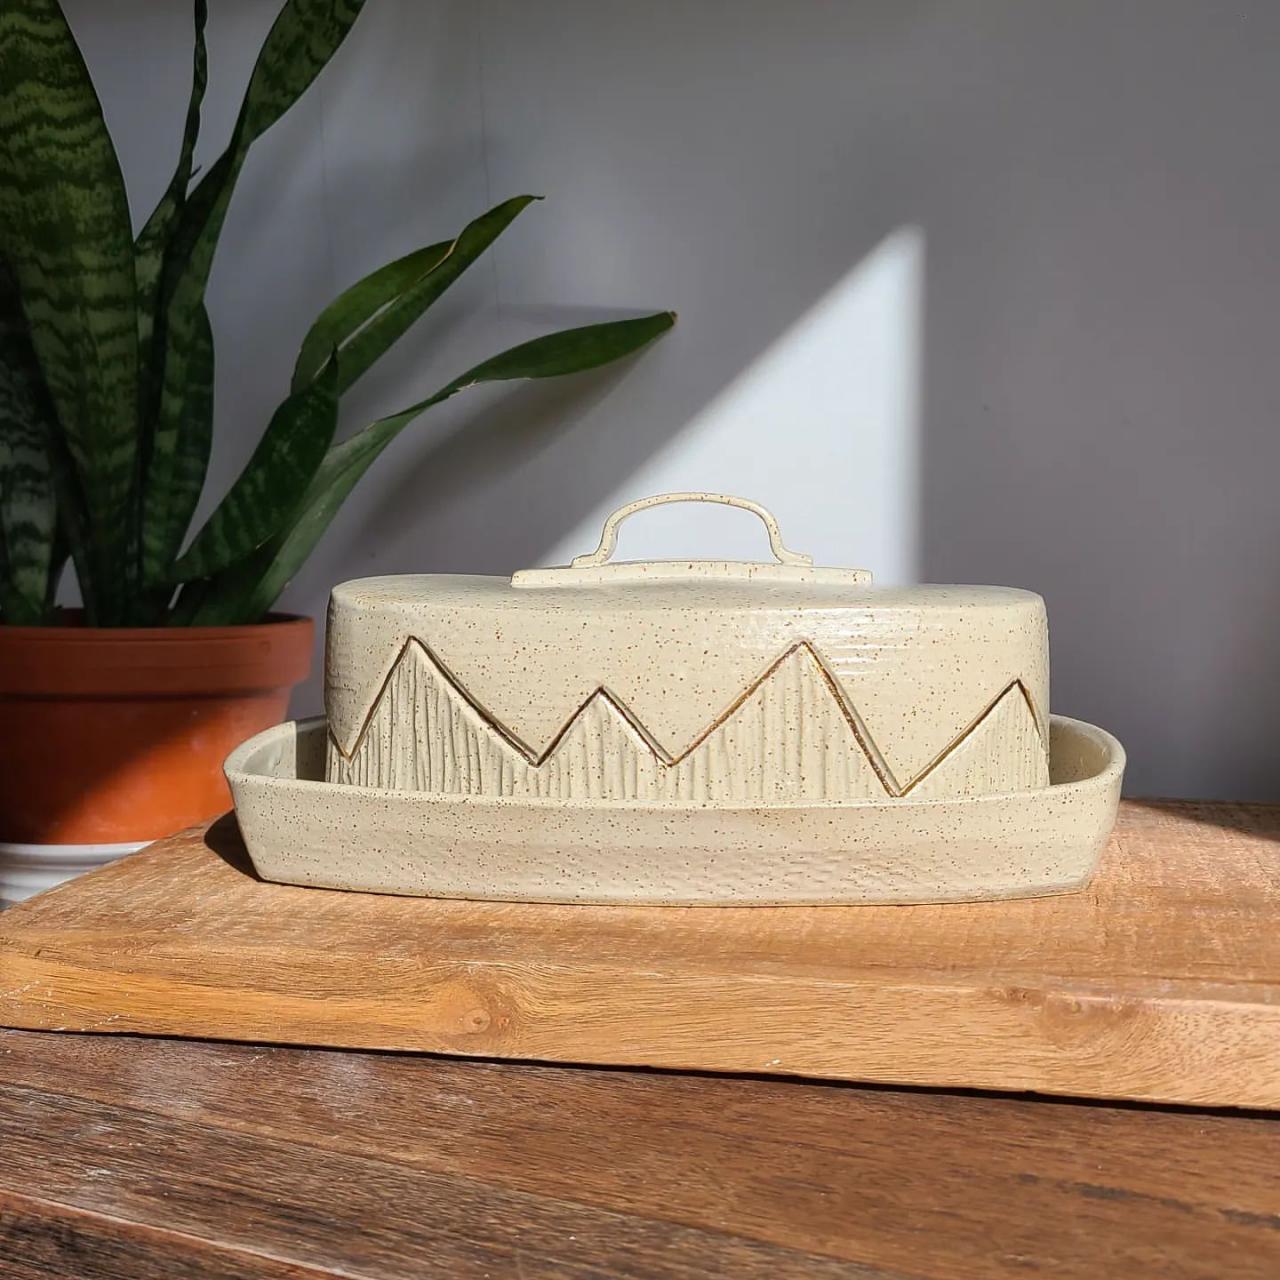 handmade ceramic butter dish with handle